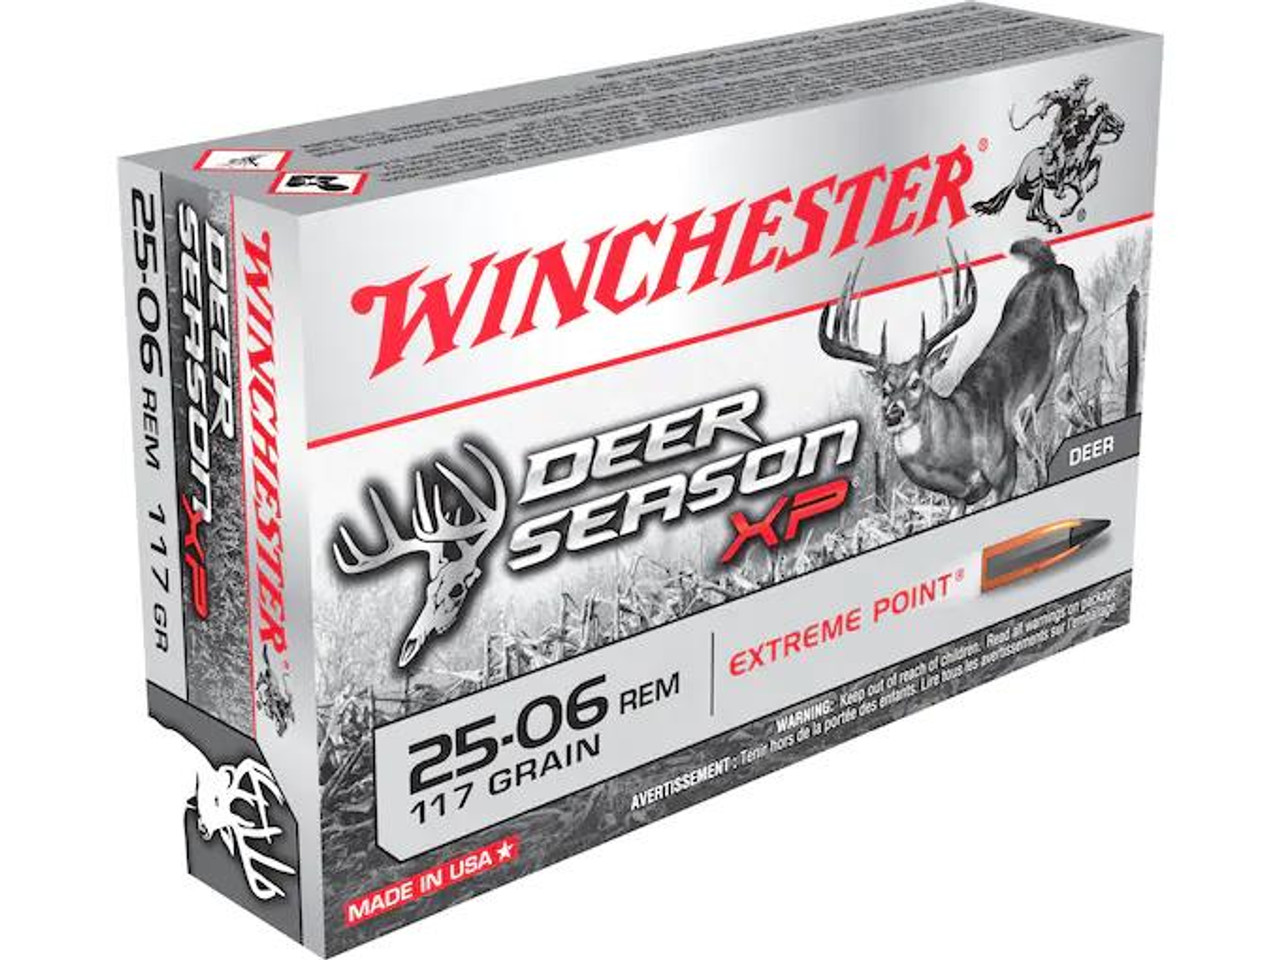 Winchester Deer Season XP .25-06 Remington 117 gr Extreme Point Polymer Tip 20 rds.